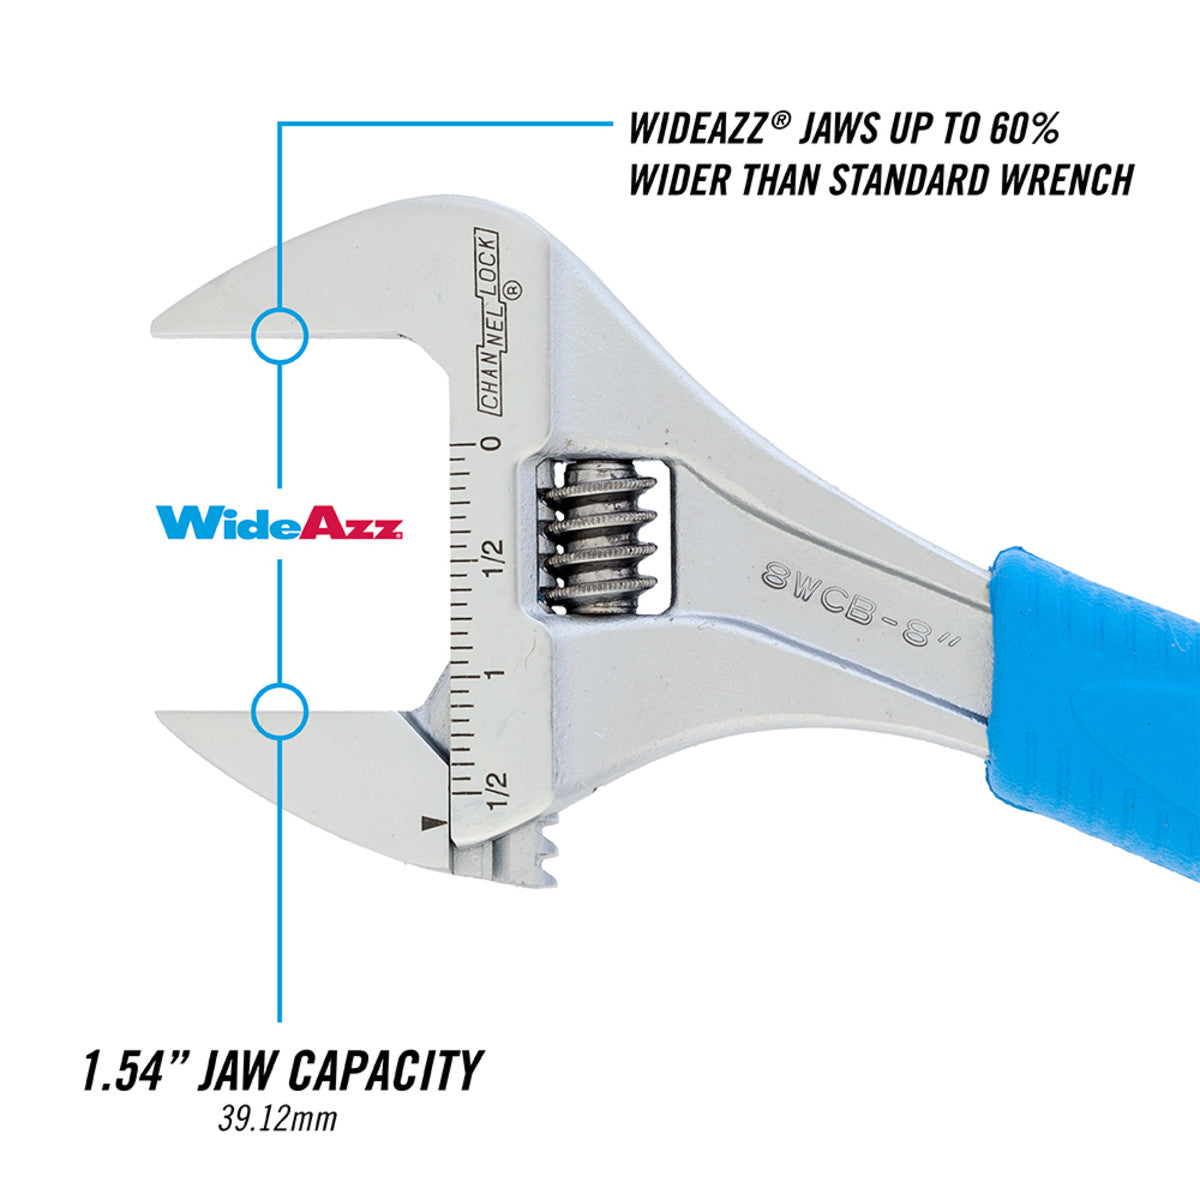 8WCB - 8" Code Blue Wideazz Adjustable Wrench